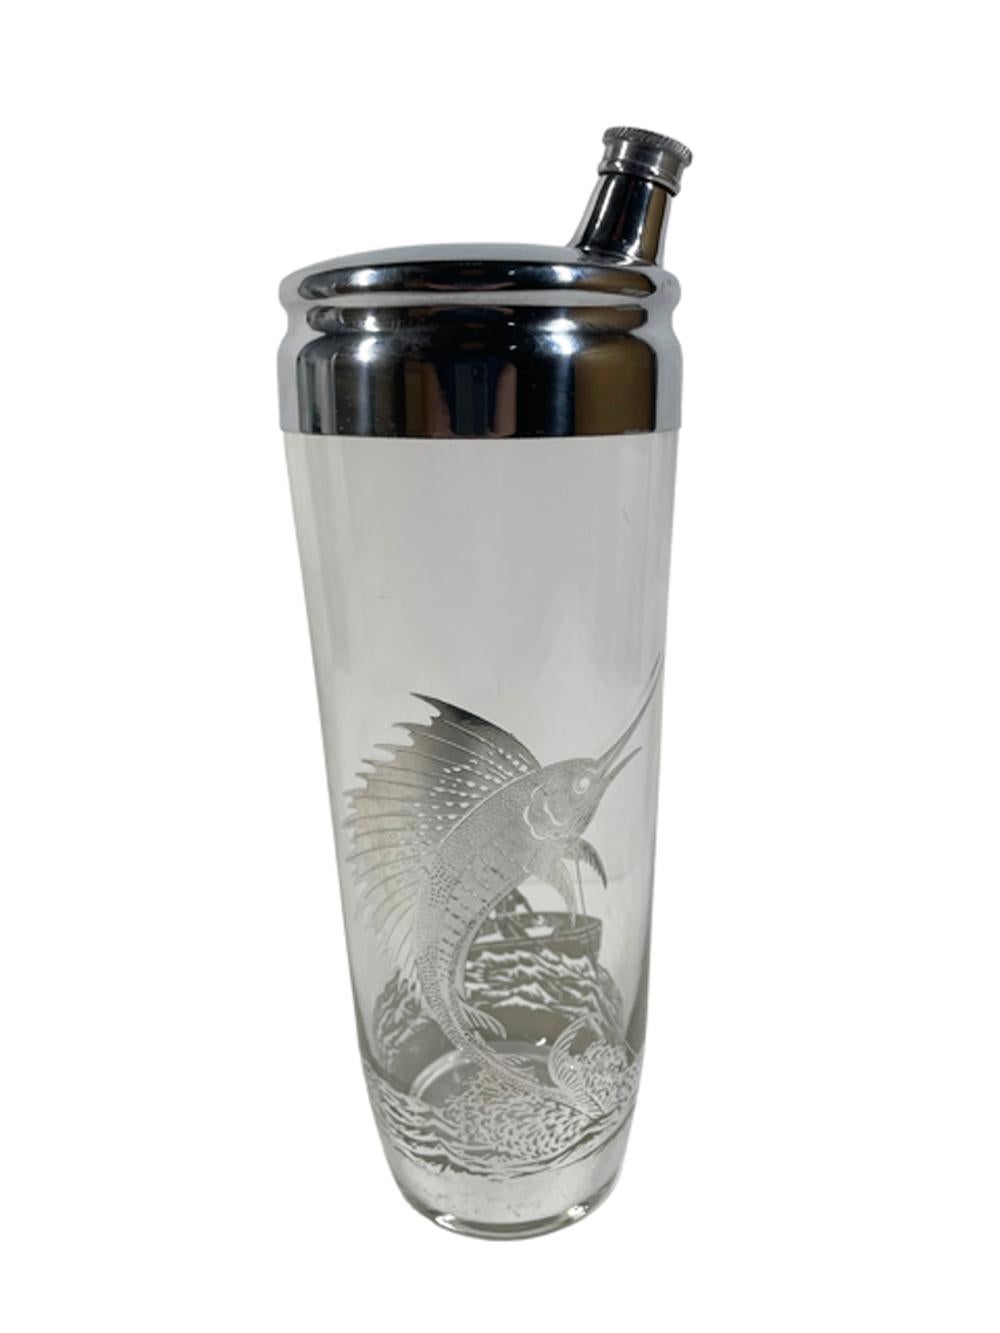 Art Deco silver overlay cocktail shaker and 6 double old fashioned glasses. The shaker and glasses all decorated in sterling overlay with a leaping sailfish / marlin on the front and two men fishing from a dory on the back, all connected by a wavey